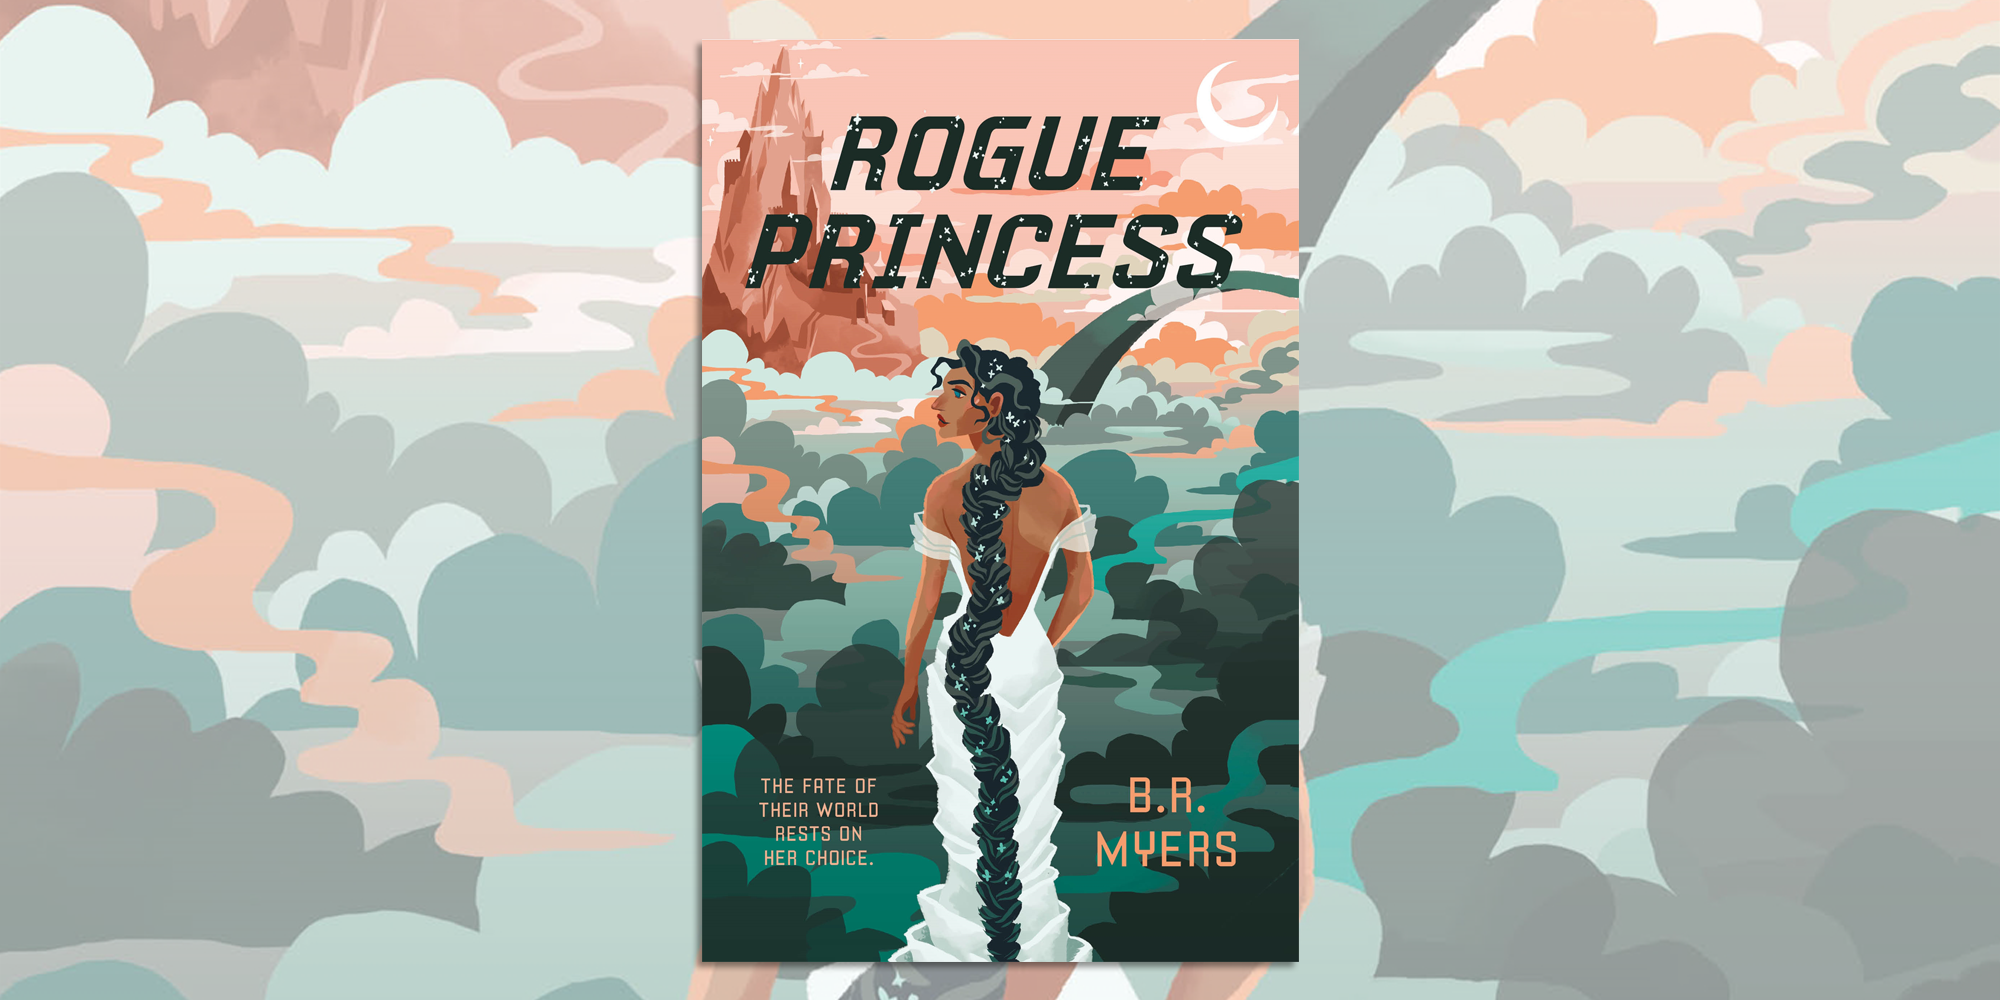 An Interview with B.R. Myers, Author of Rogue Princess